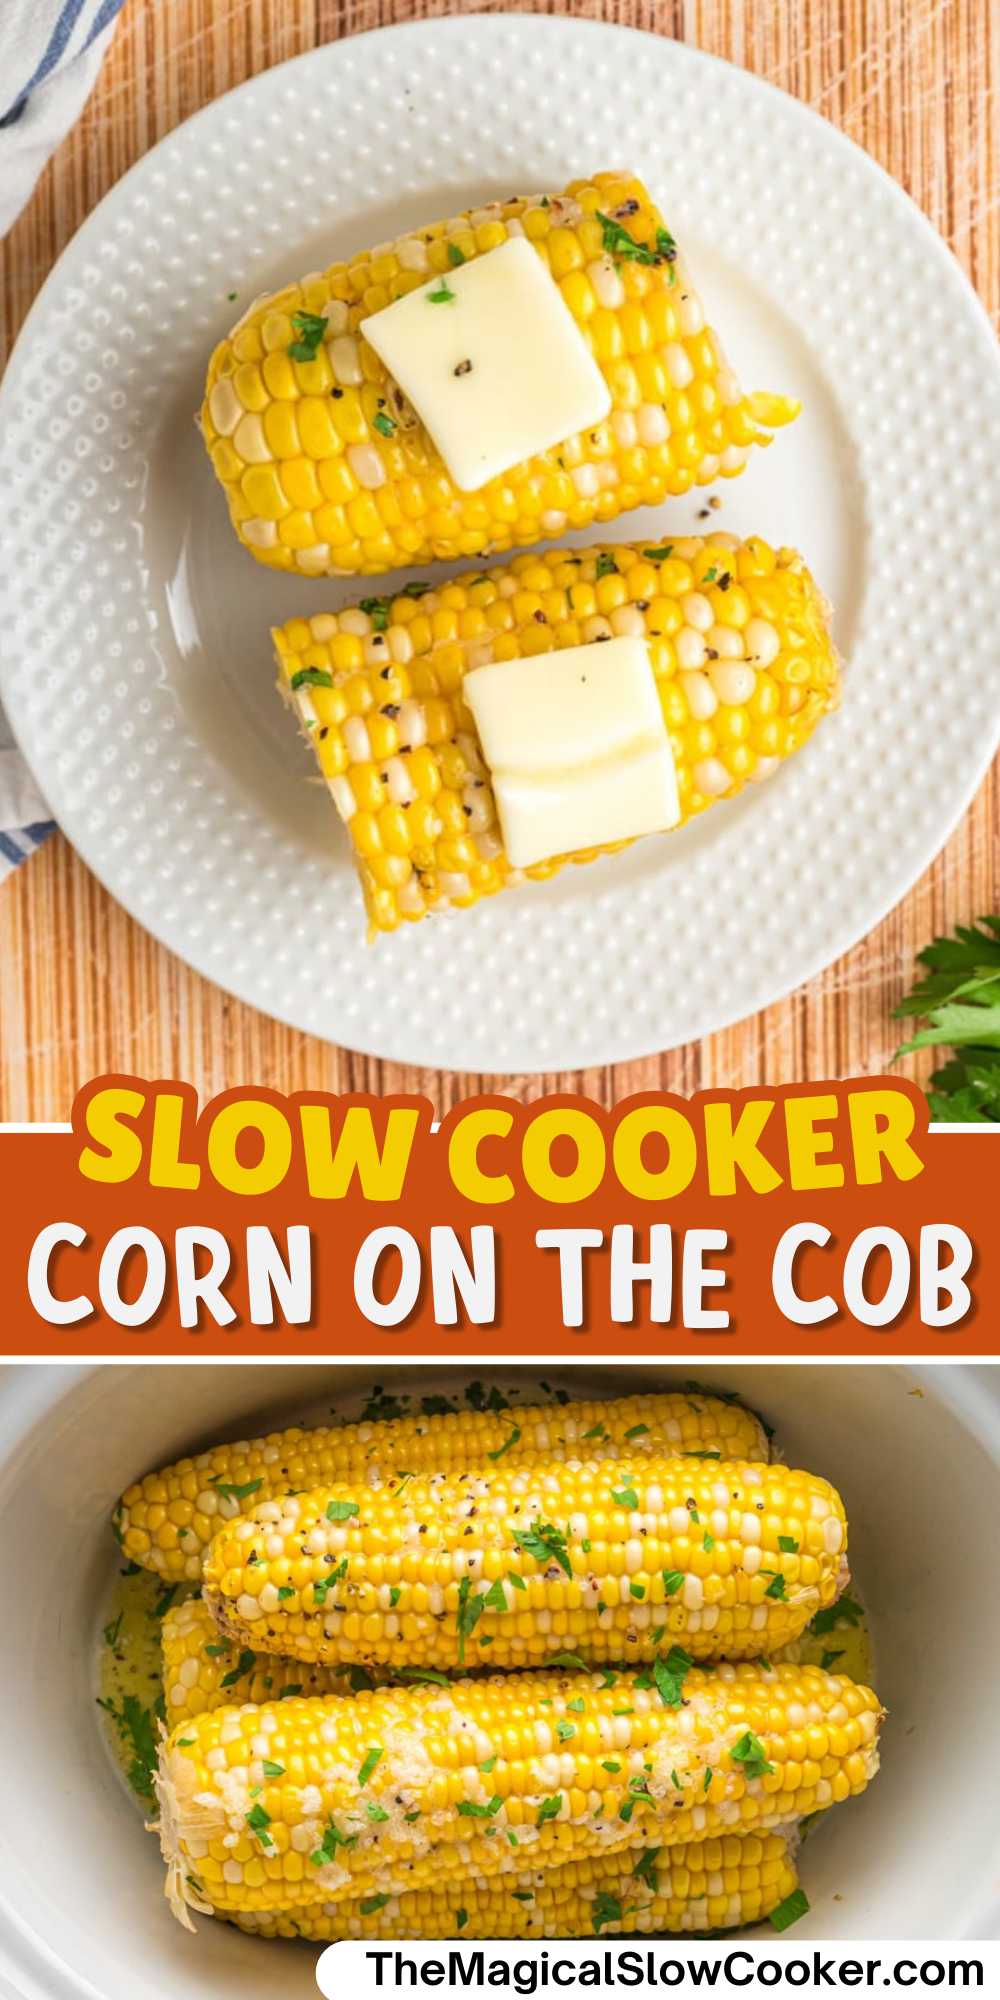 images of corn on the cob with text for pinterest.